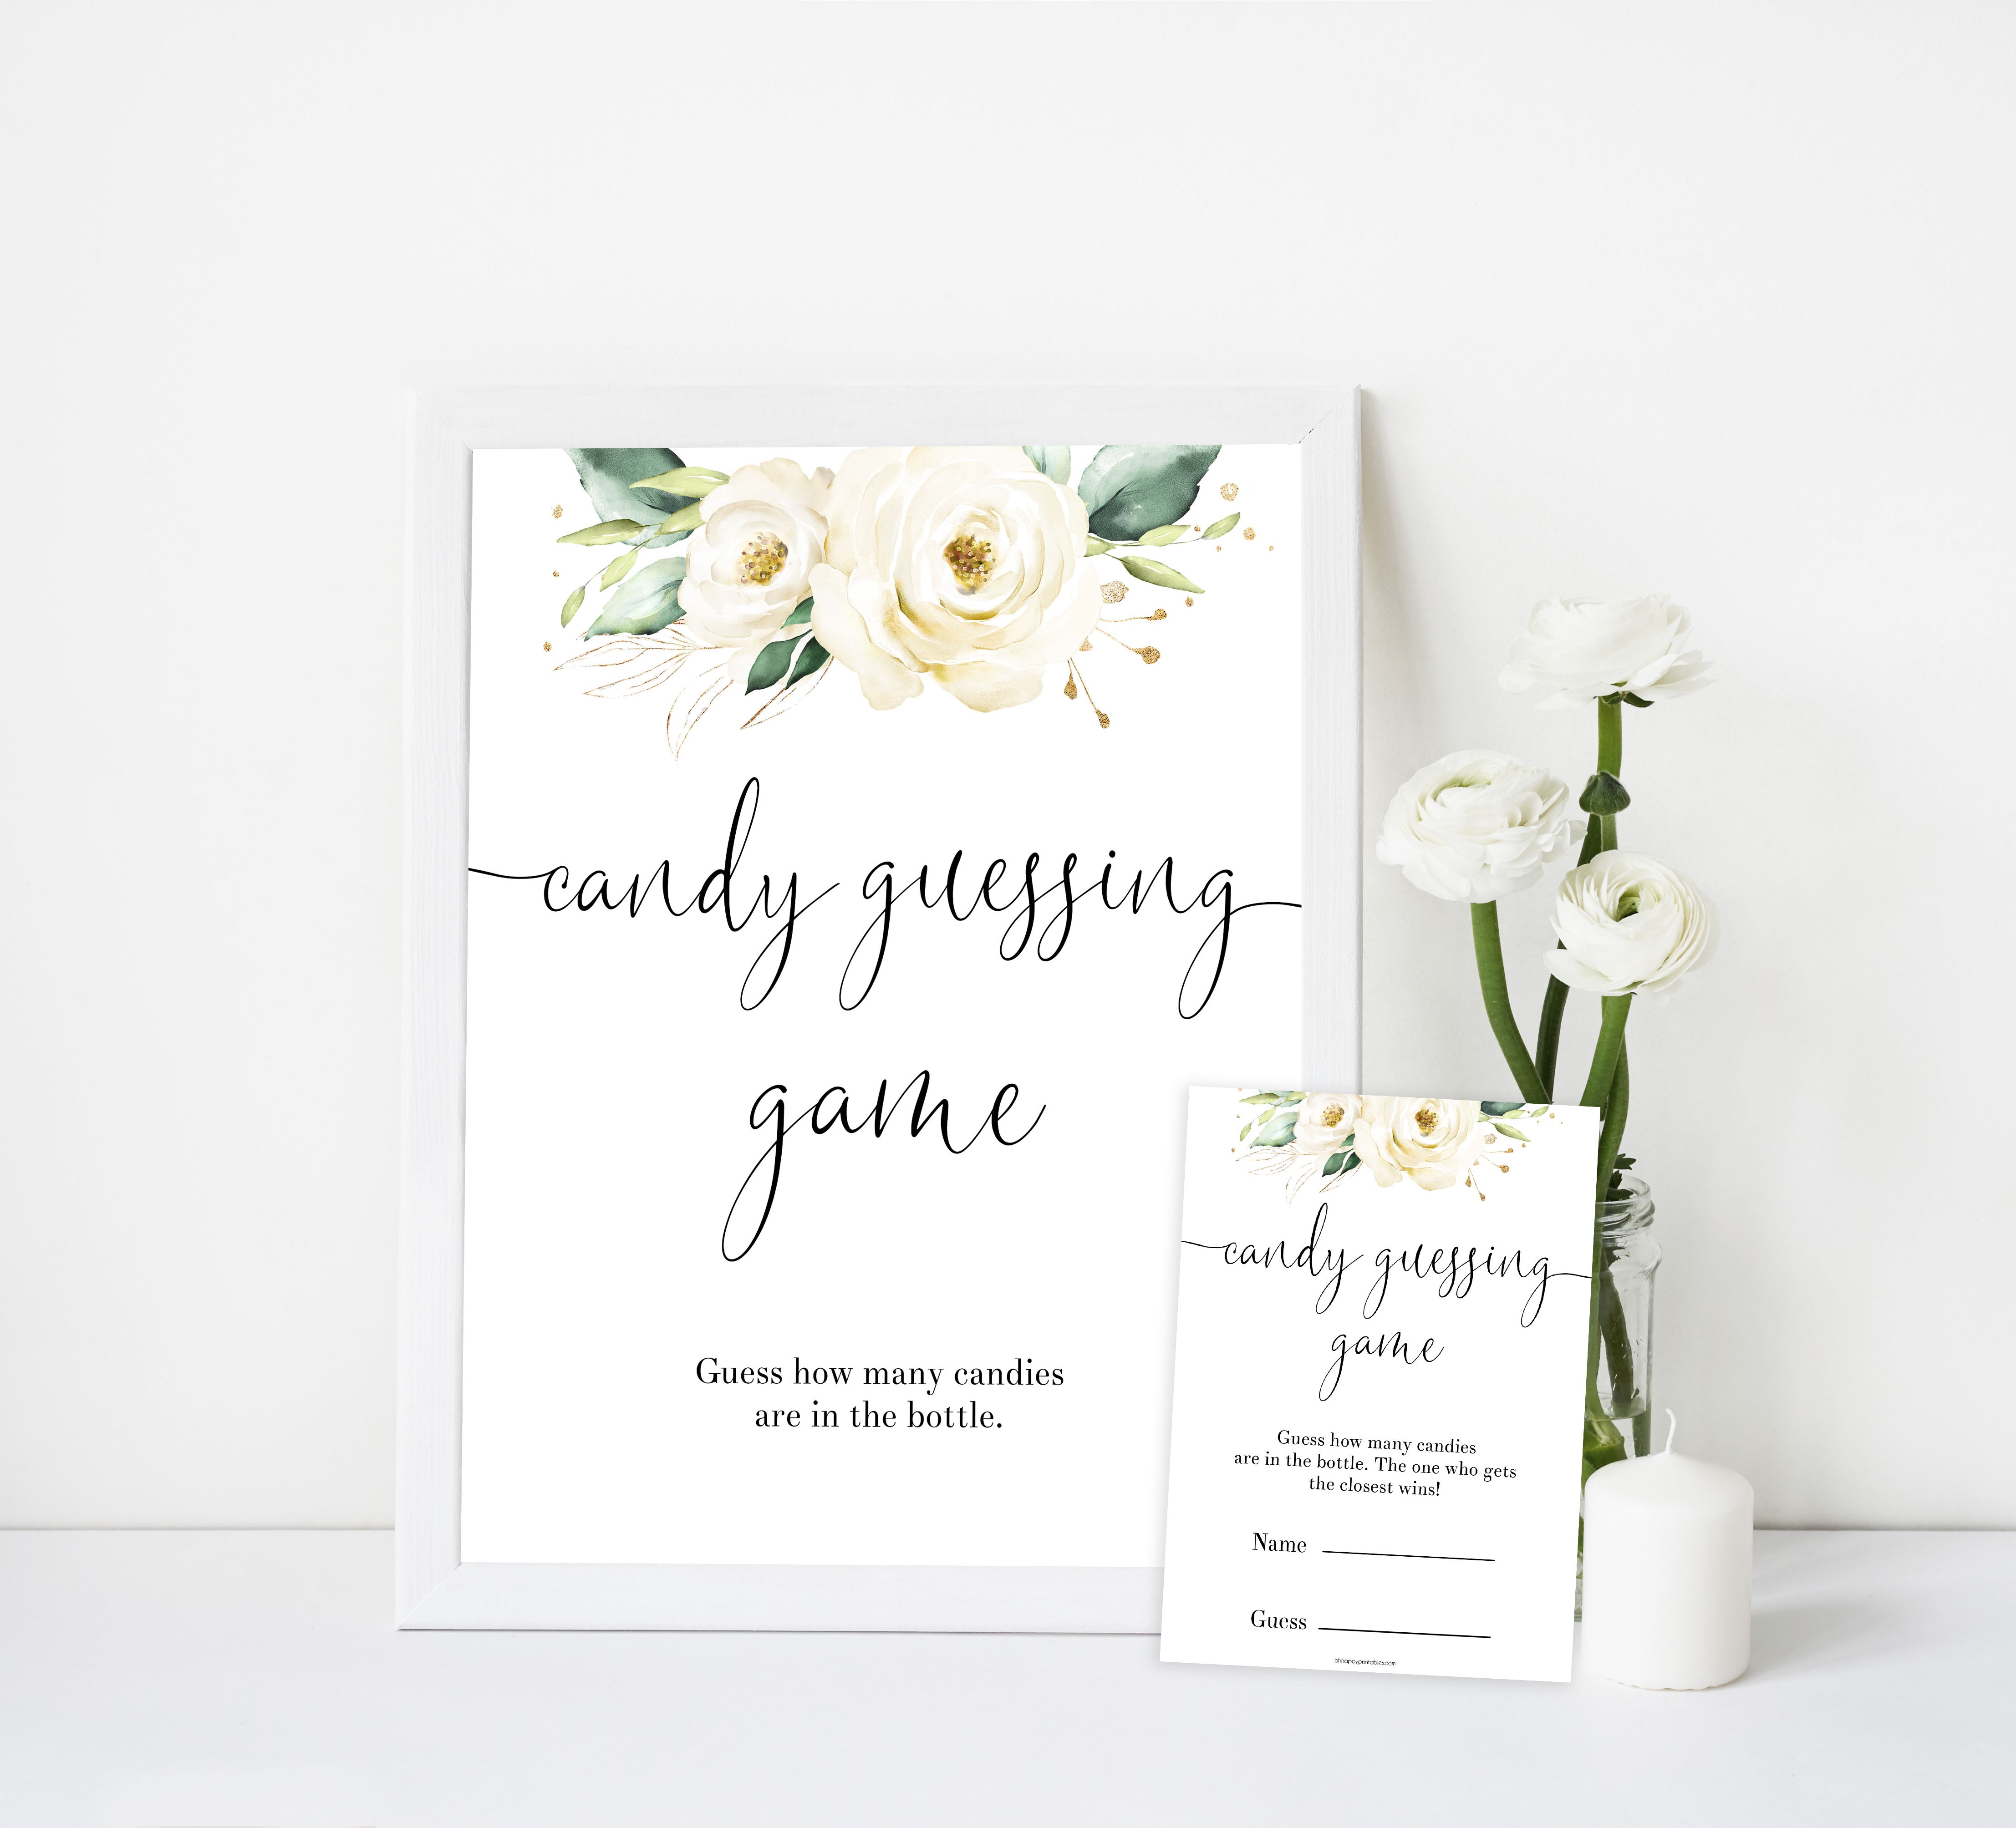 candy guessing baby game, White floral baby game, White floral baby shower, White floral games, Floral baby games, Floral baby shower, White floral